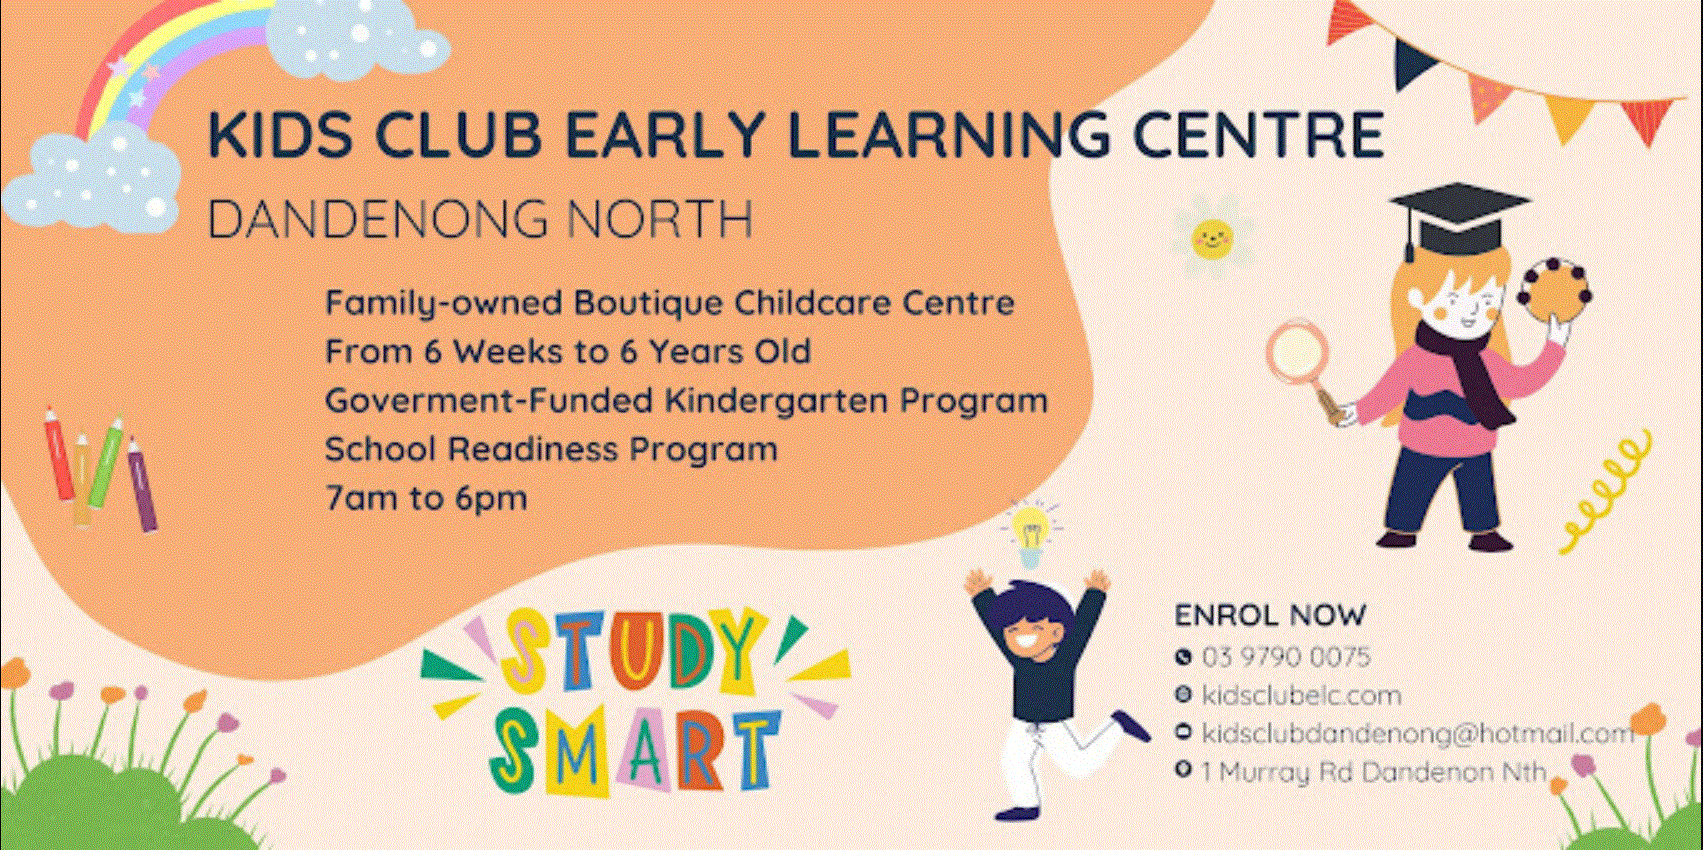 Kids Club Early Learning Centre Dandenong North